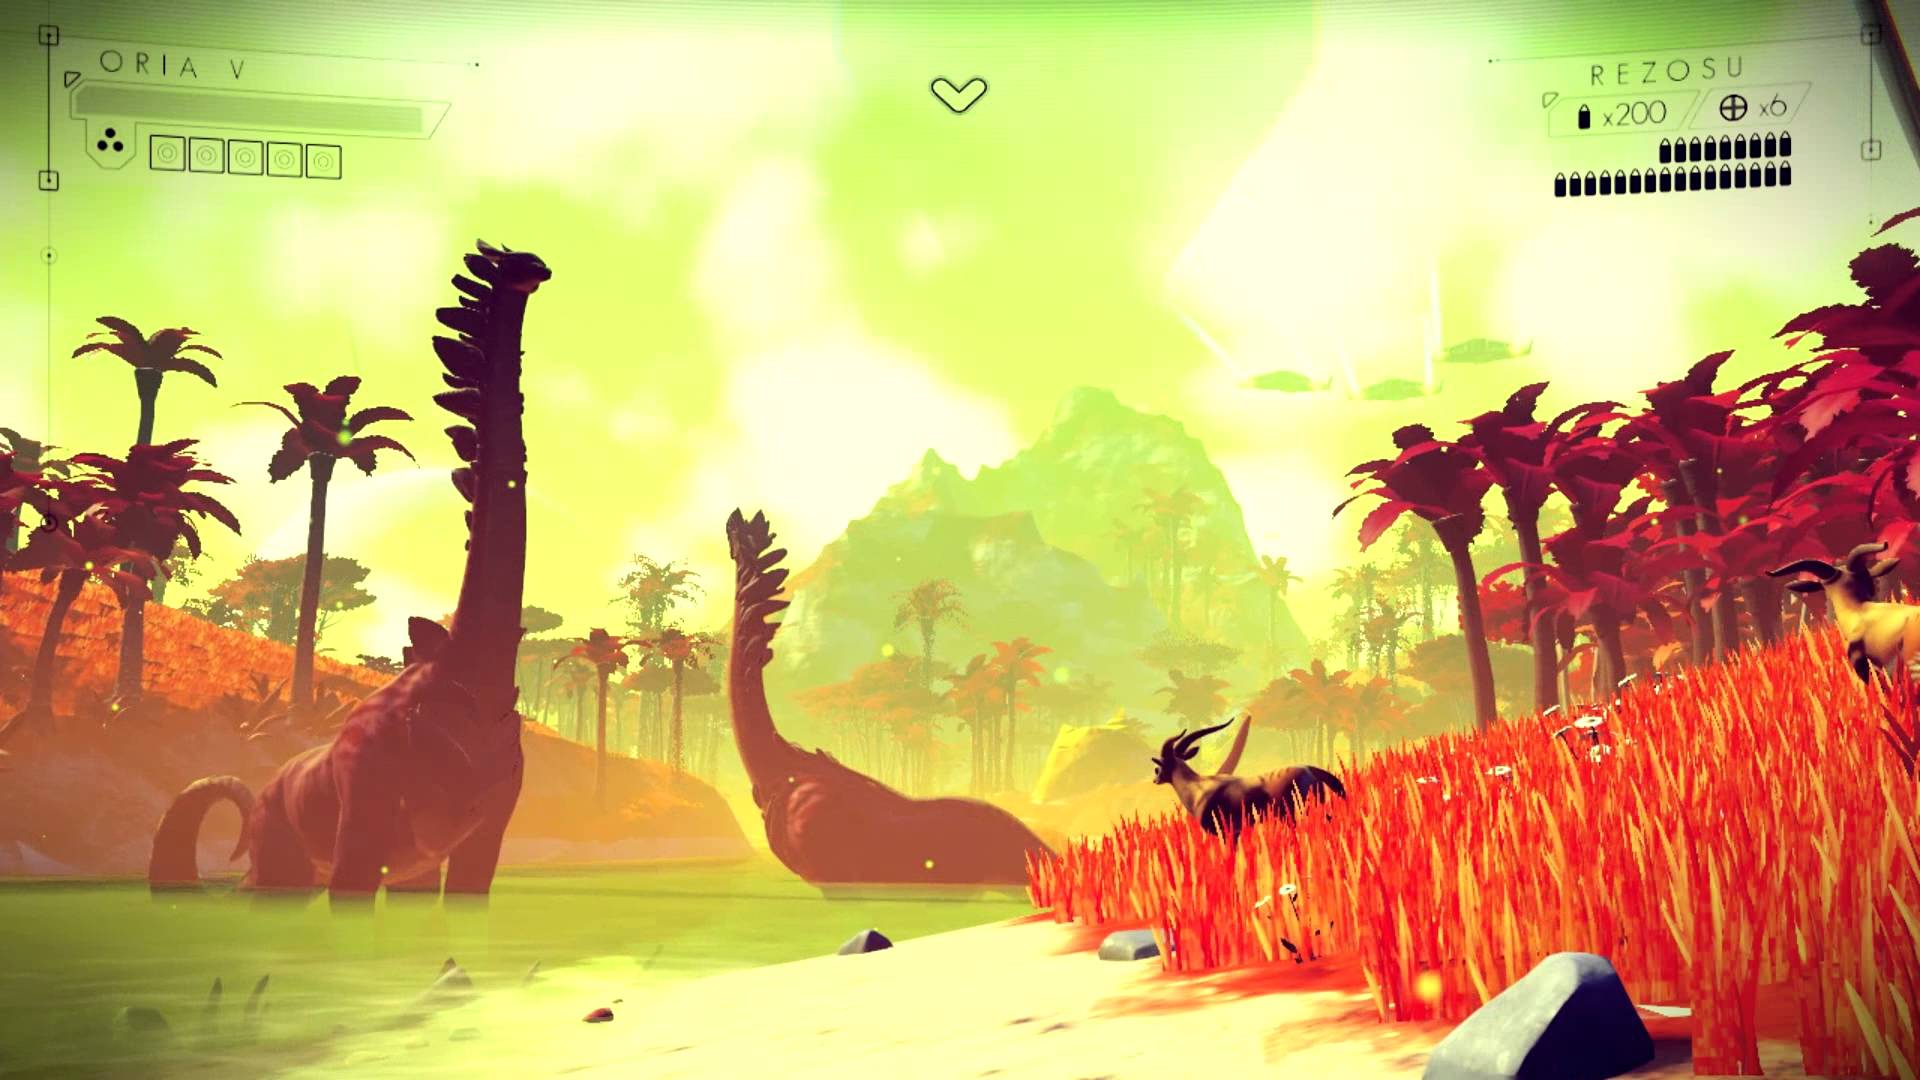 Prepare for a Night Under No Man’s Sky at Playstation Experience 2014